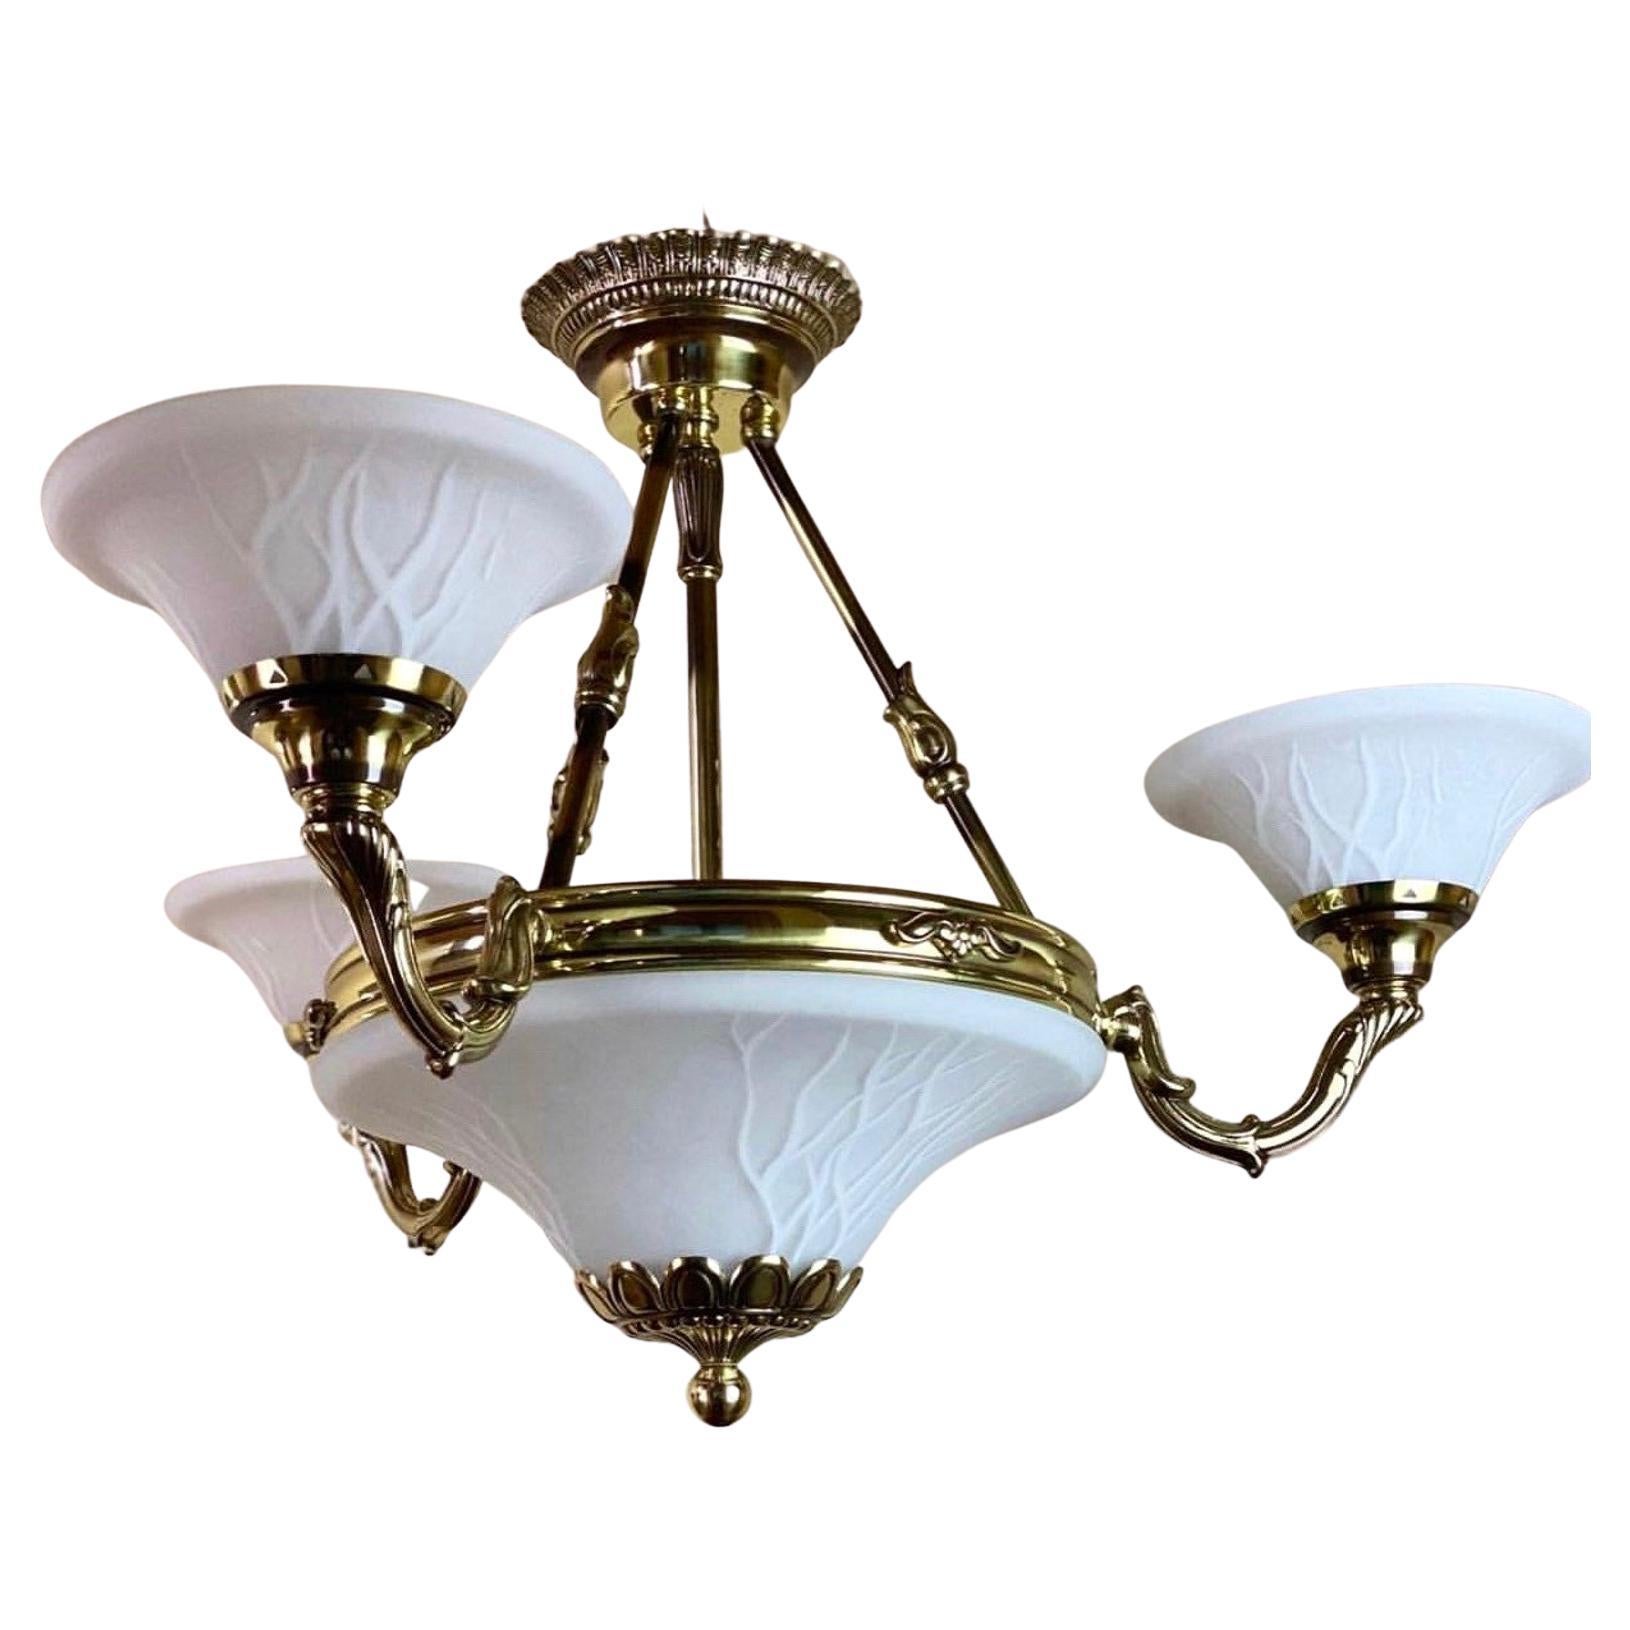 Chandelier “Bejorama”, Spain “Catherine” Collection For Sale